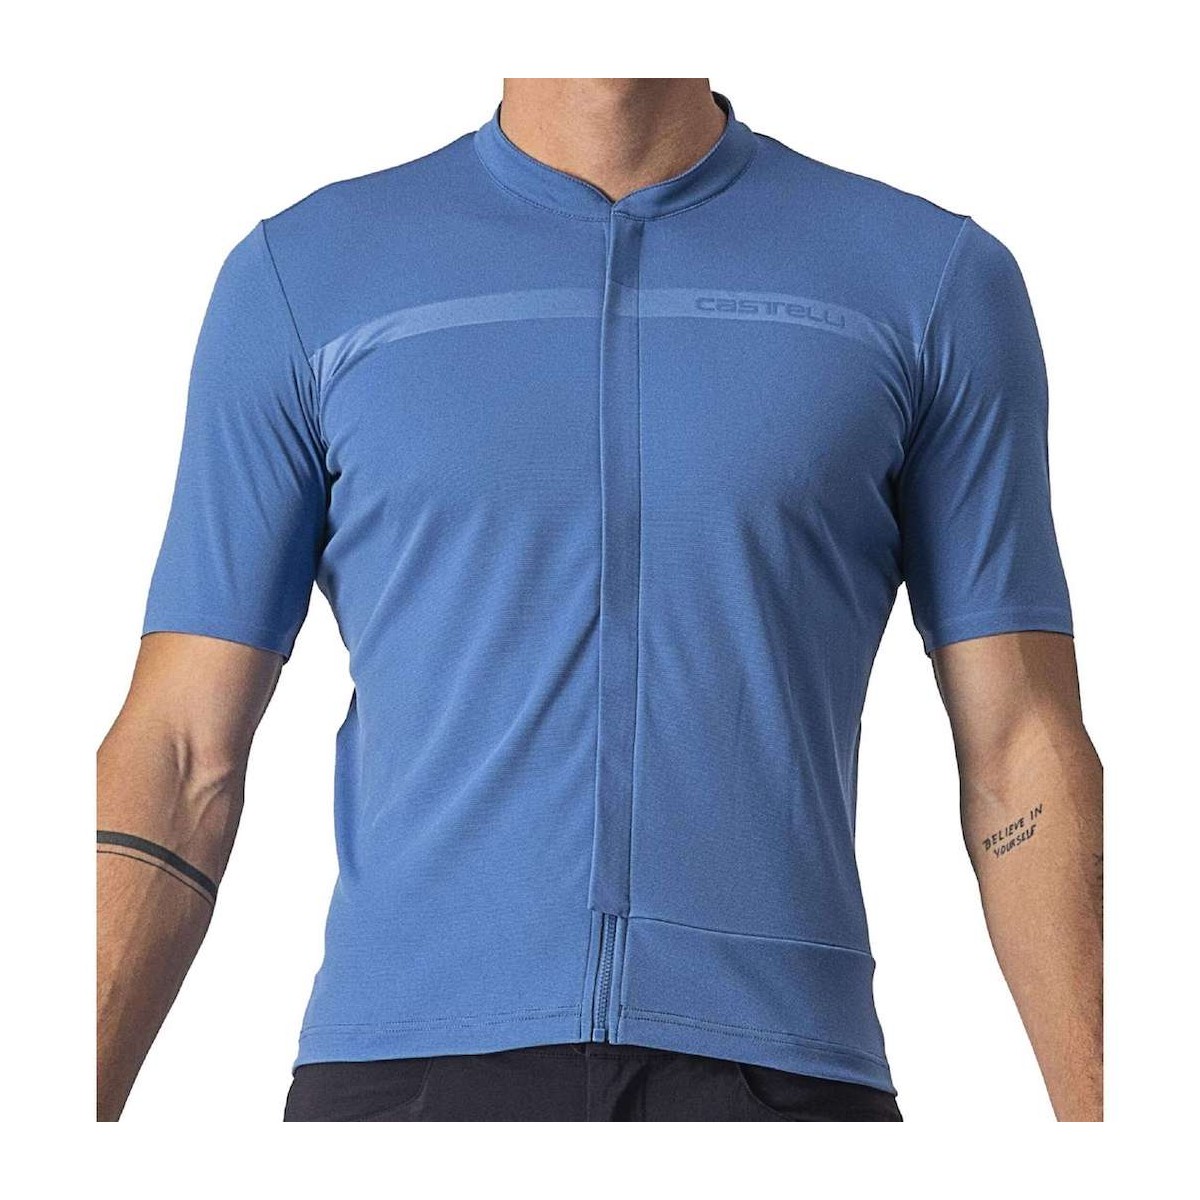 CASTELLI UNLIMITED ALL ROAD cycling shirt - blue